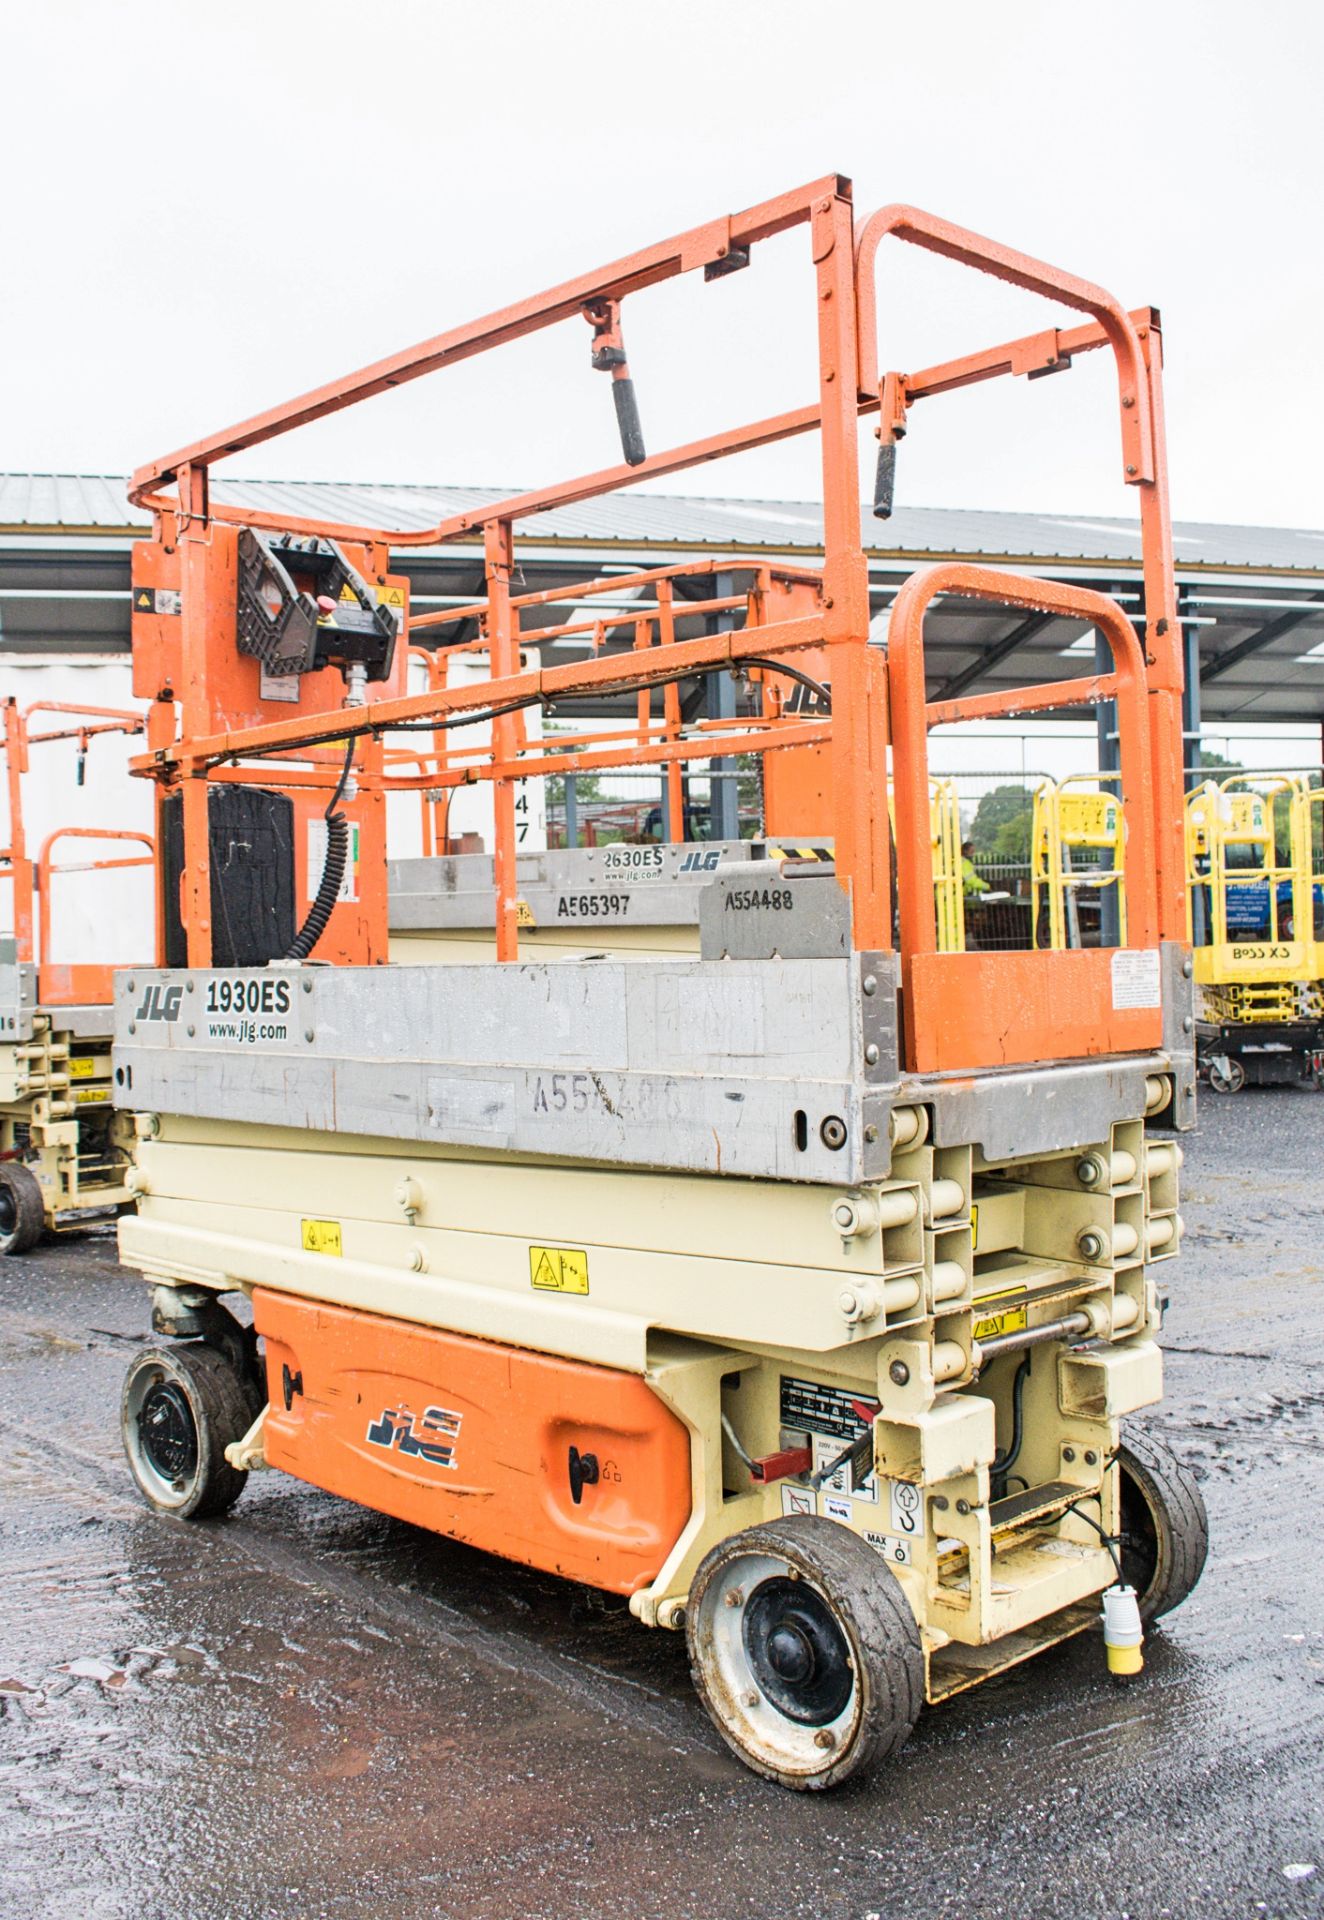 JLG 1930ES battery electric scissor lift Year: 2011 S/N: 24915 Recorded Hours: 215 A554488 - Image 3 of 8